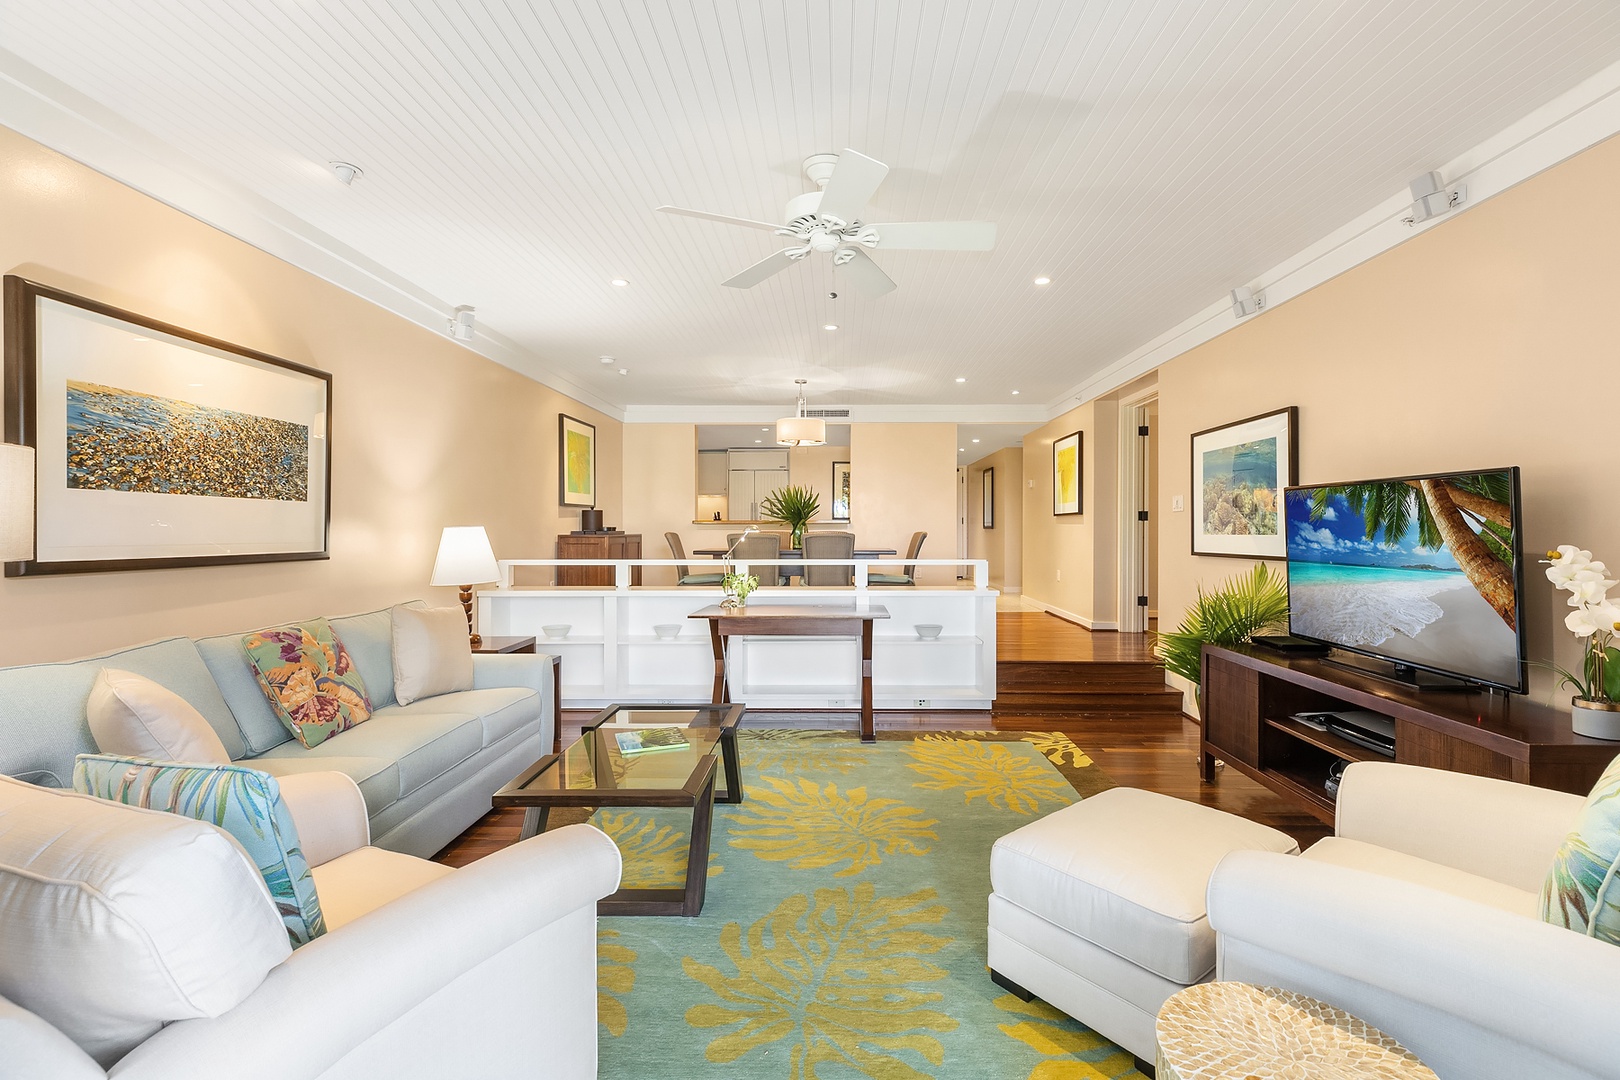 Kahuku Vacation Rentals, Turtle Bay Villas 112 - Dining area opens up into a large living space with comfortable seating.